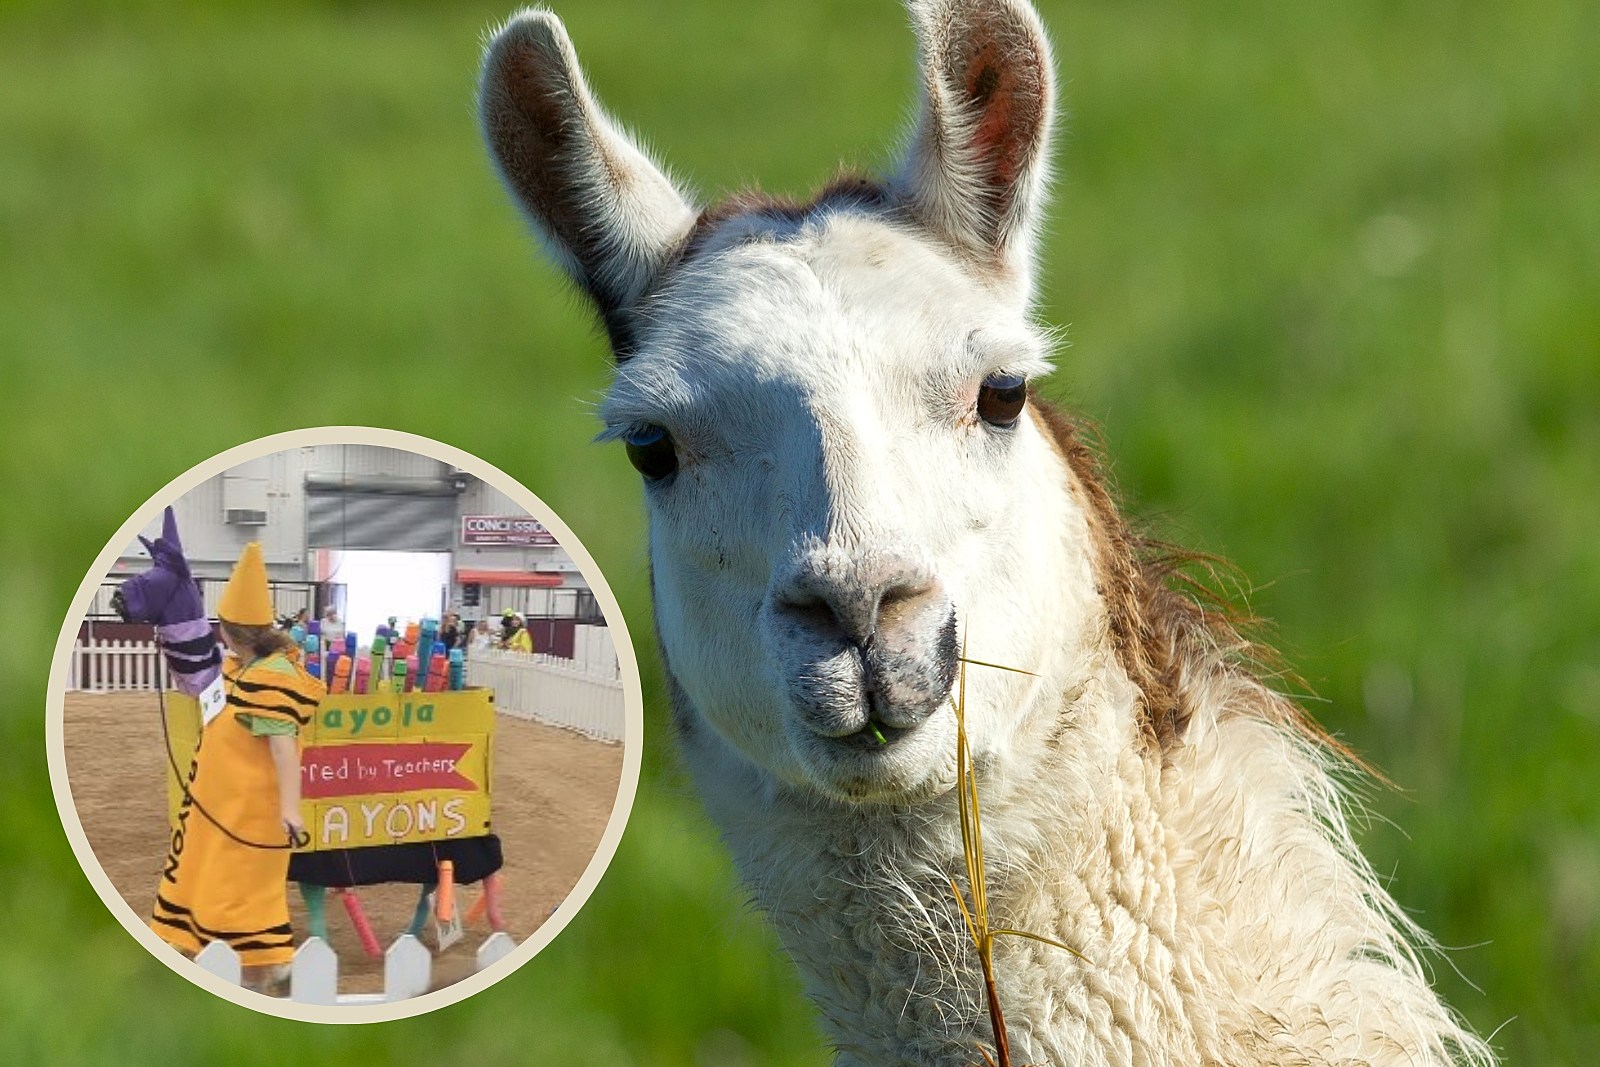 Indiana State Fair's Hilariously Wholesome Llama Costume Contest